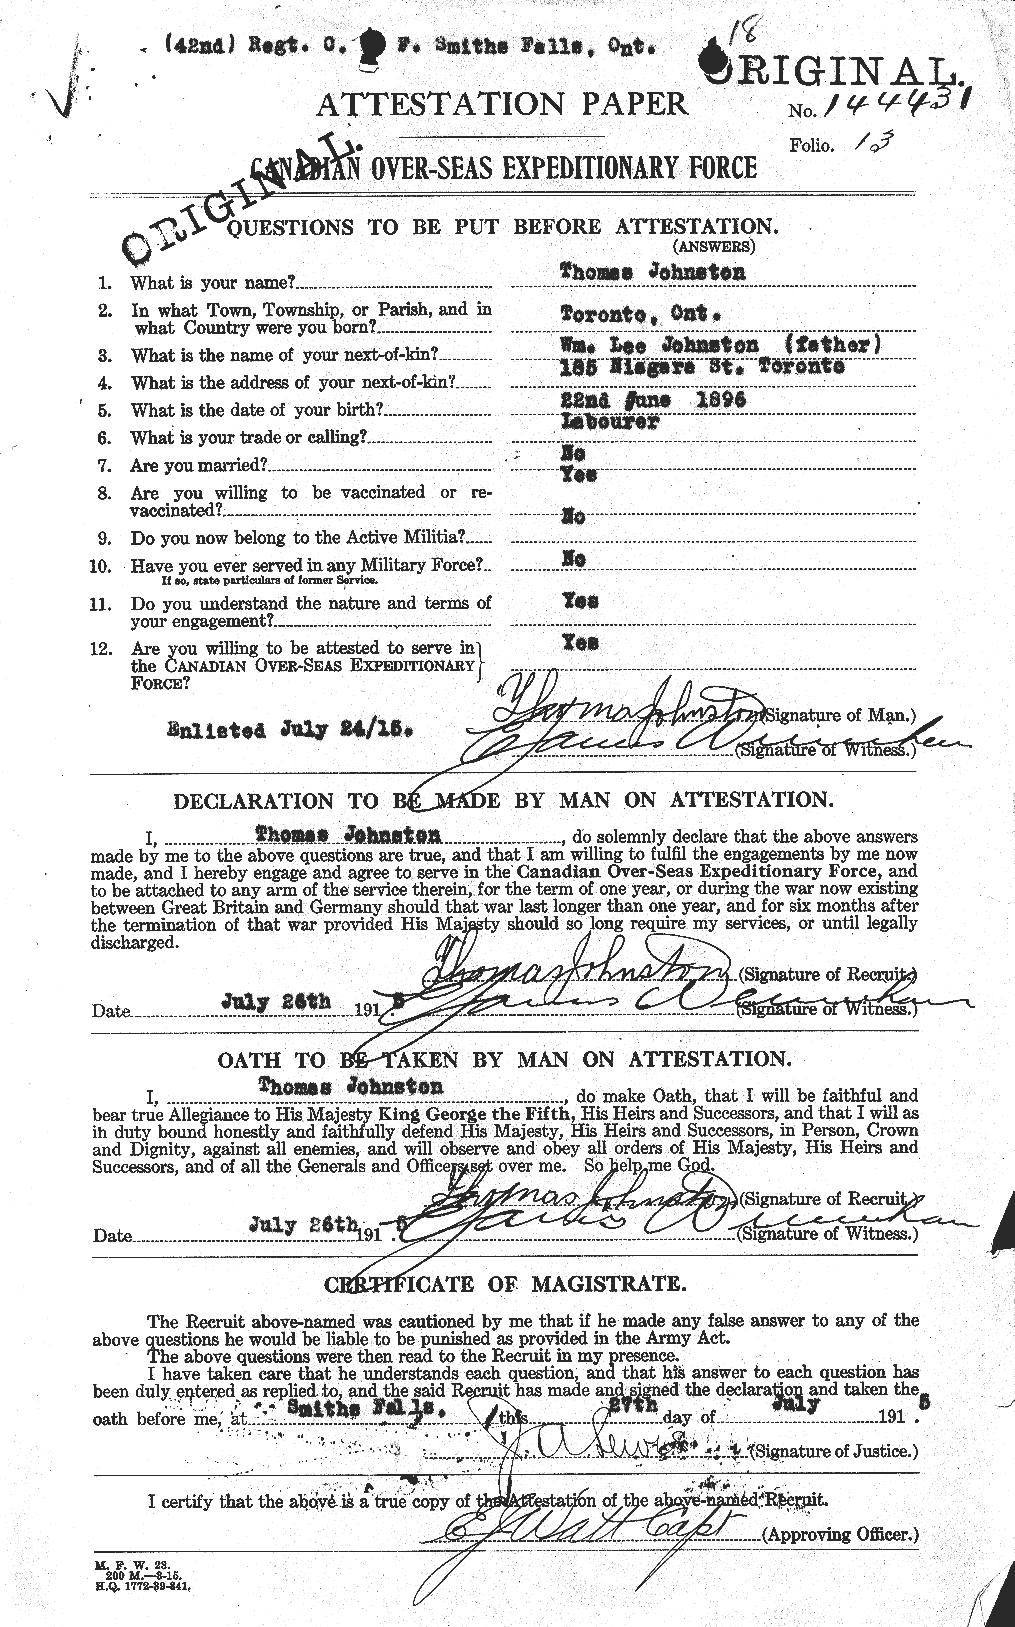 Personnel Records of the First World War - CEF 427133a